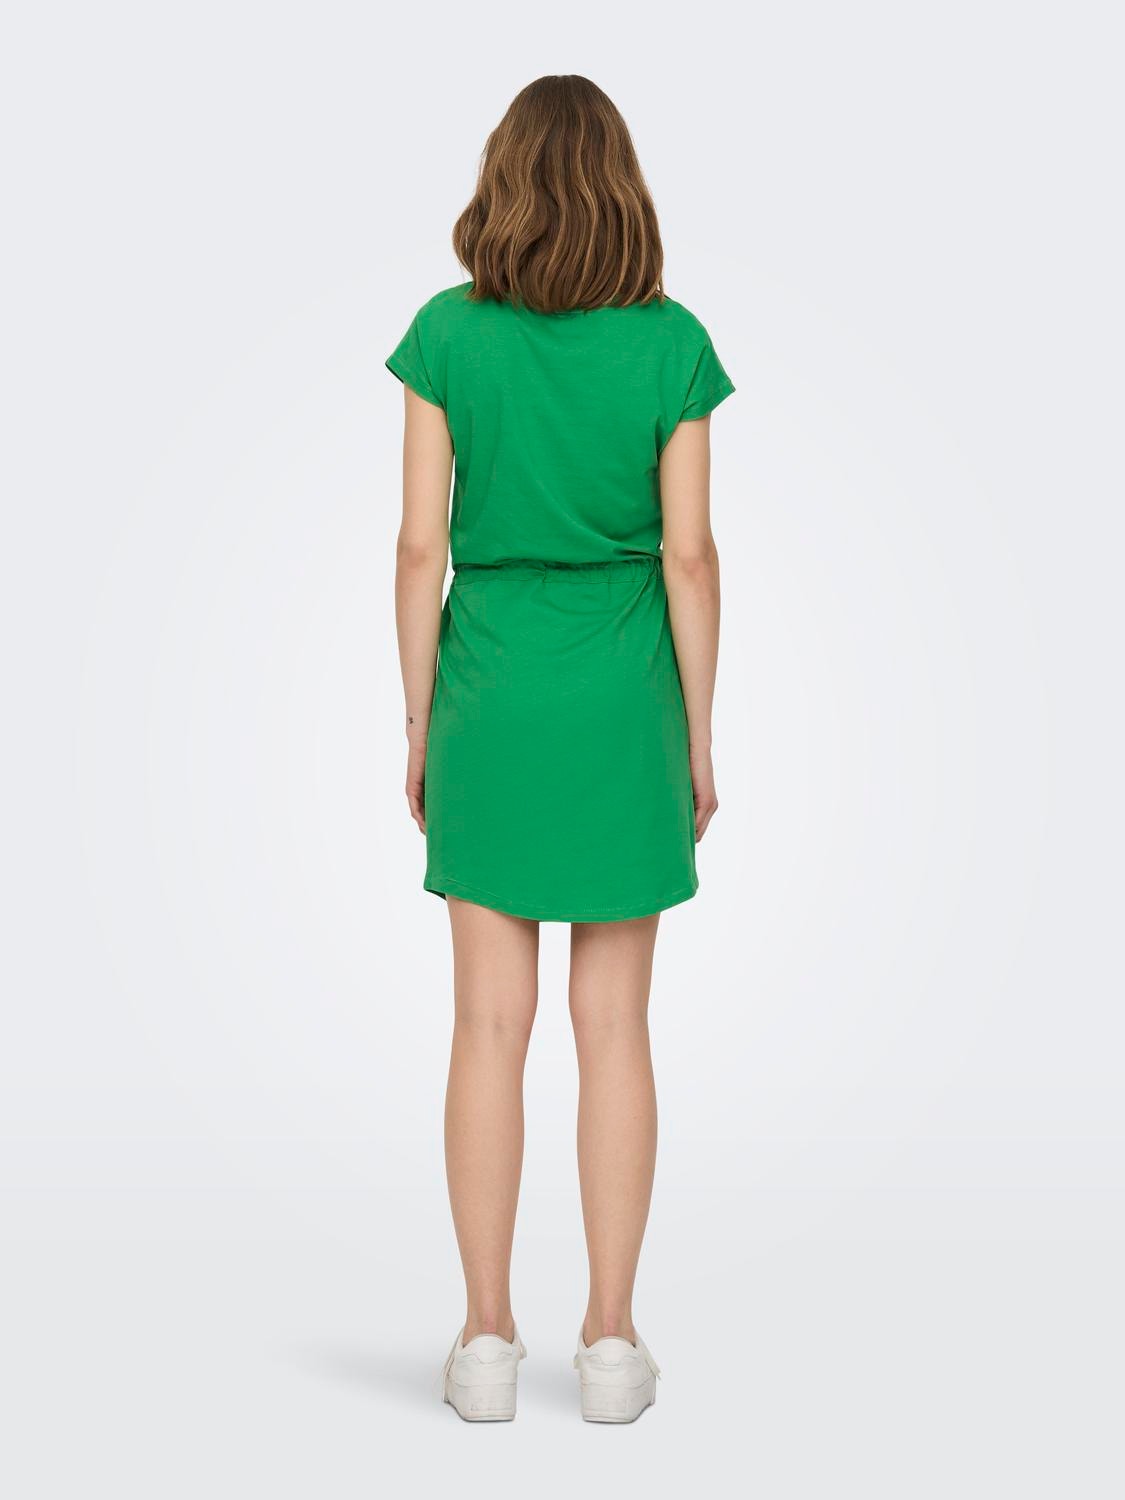 ONLY Mini Loose Short sleeved dress -Kelly Green - 15153021